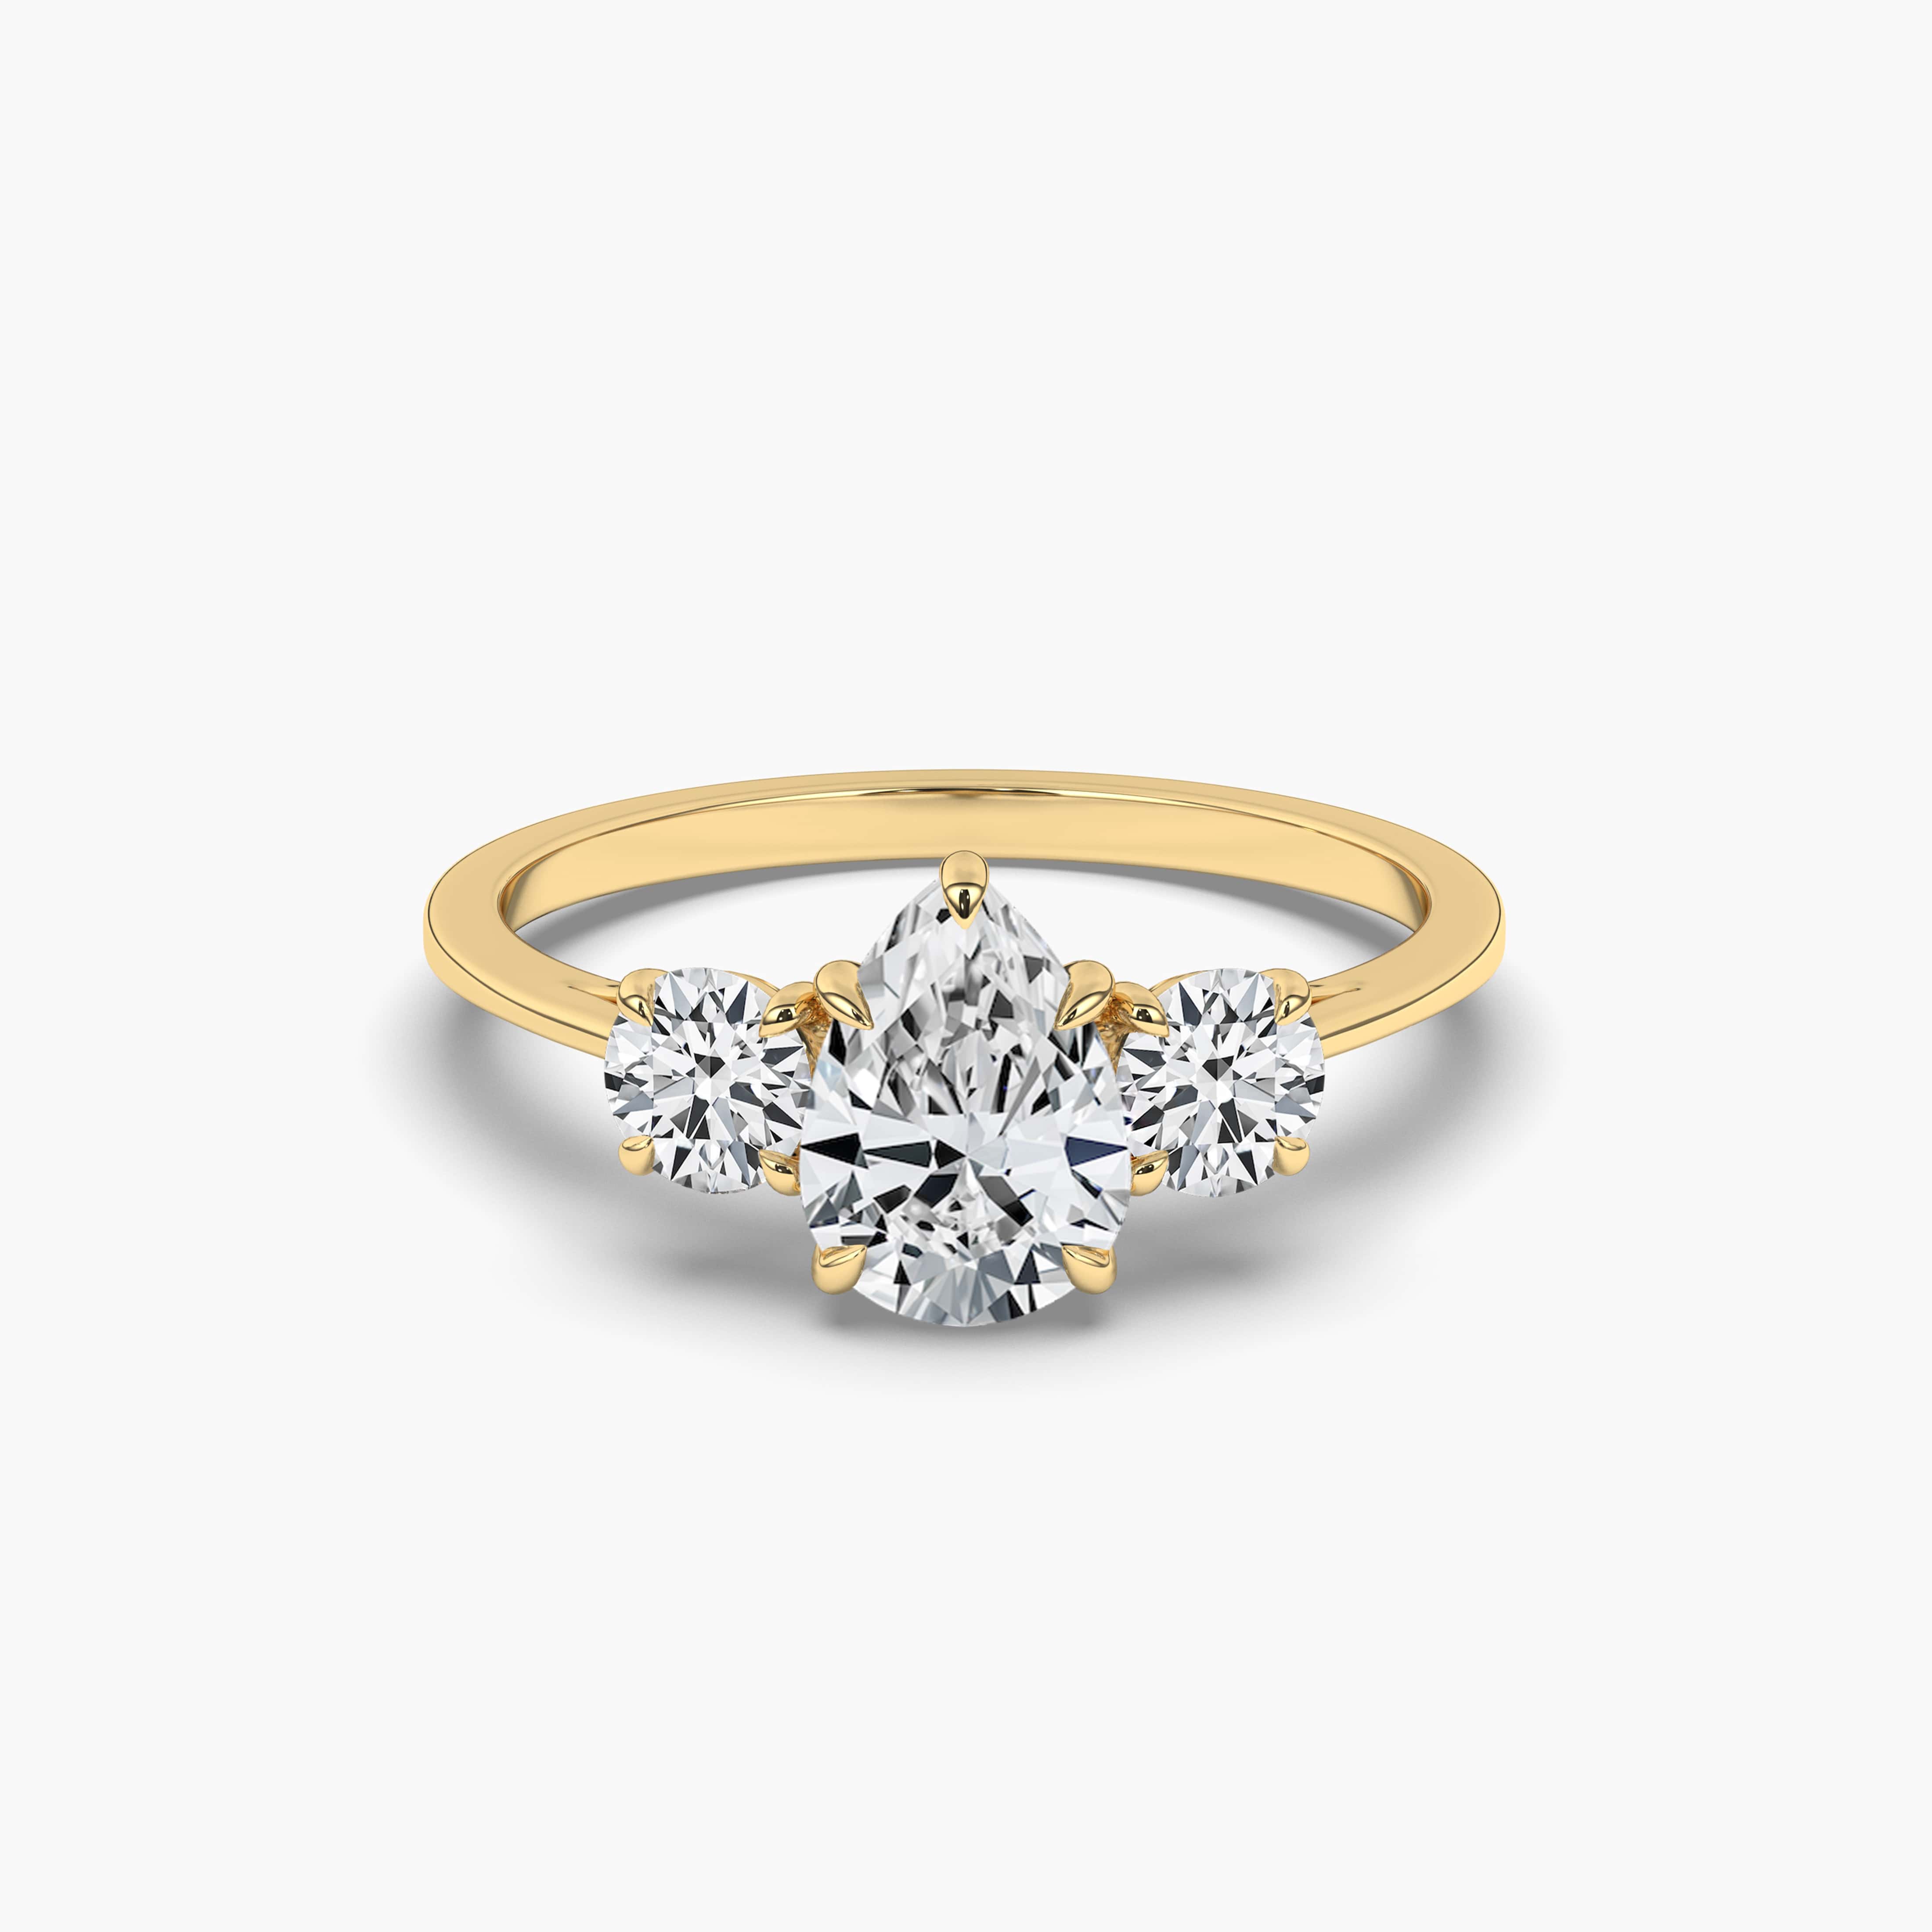 The Three Stone Pear Engagement Ring